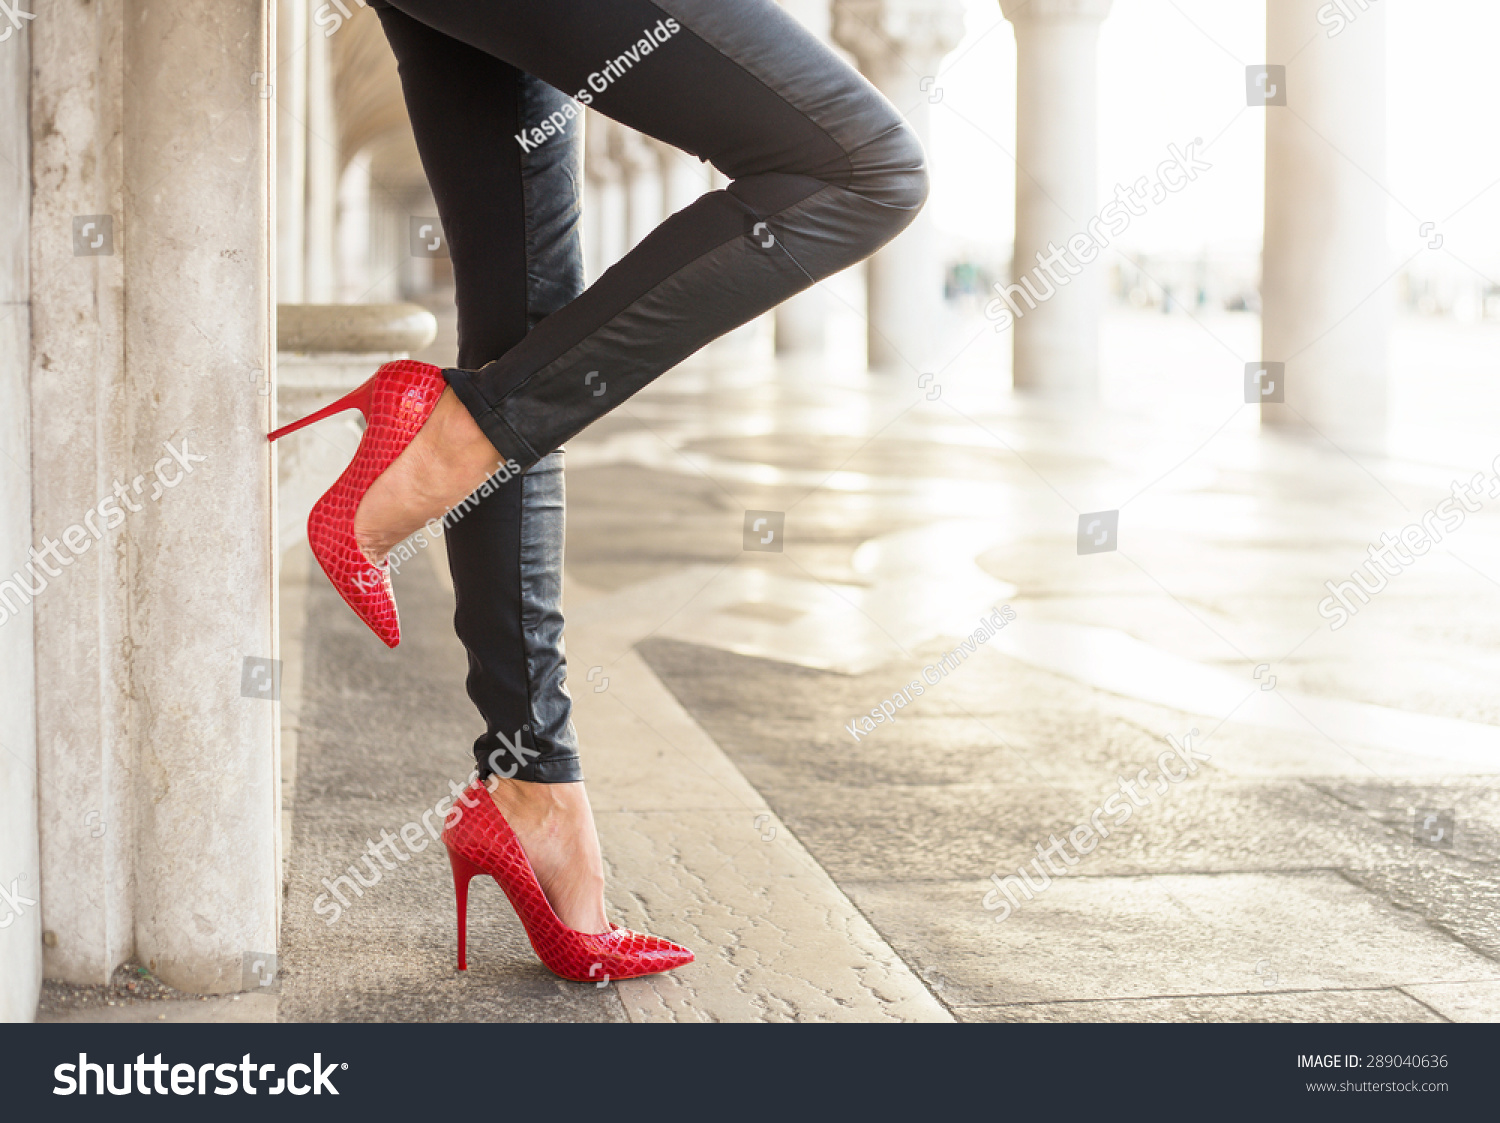 Woman Black Leather Pants Red High Stock Photo (Edit Now) 289040636 ...